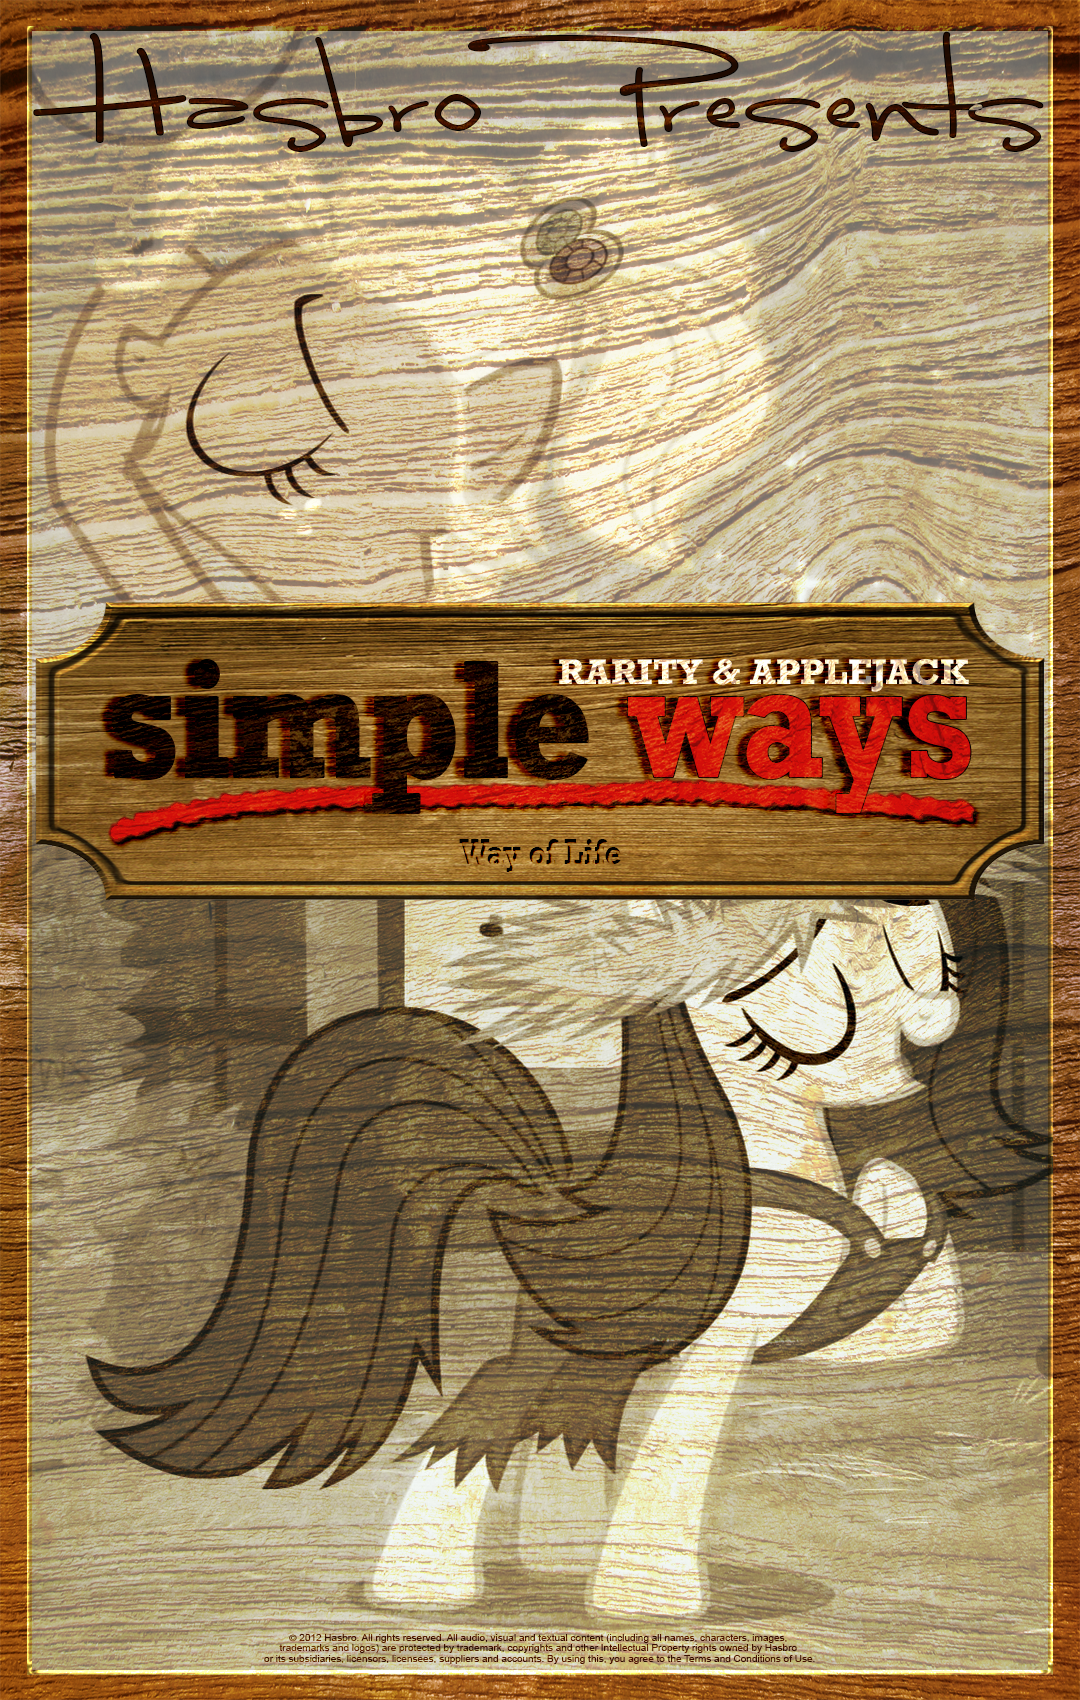 mlp___simple_ways___movie_poster_by_pims1978-d75mxt9.png